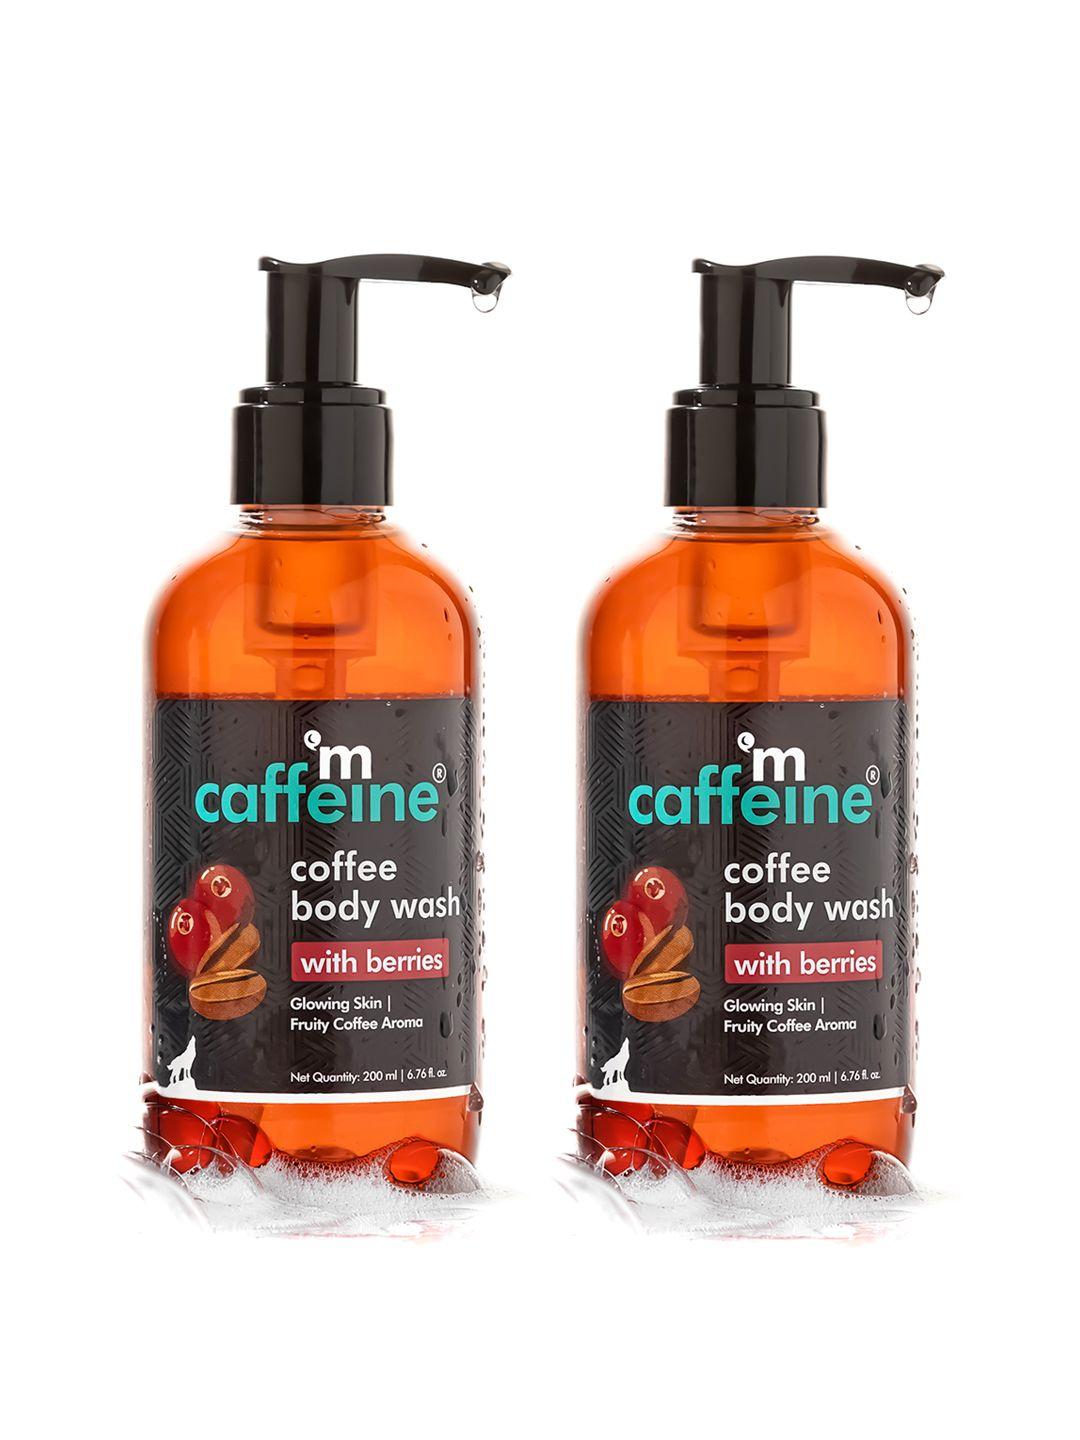 mcaffeine set of 2 coffee body wash with berries for glowing skin - 200ml each